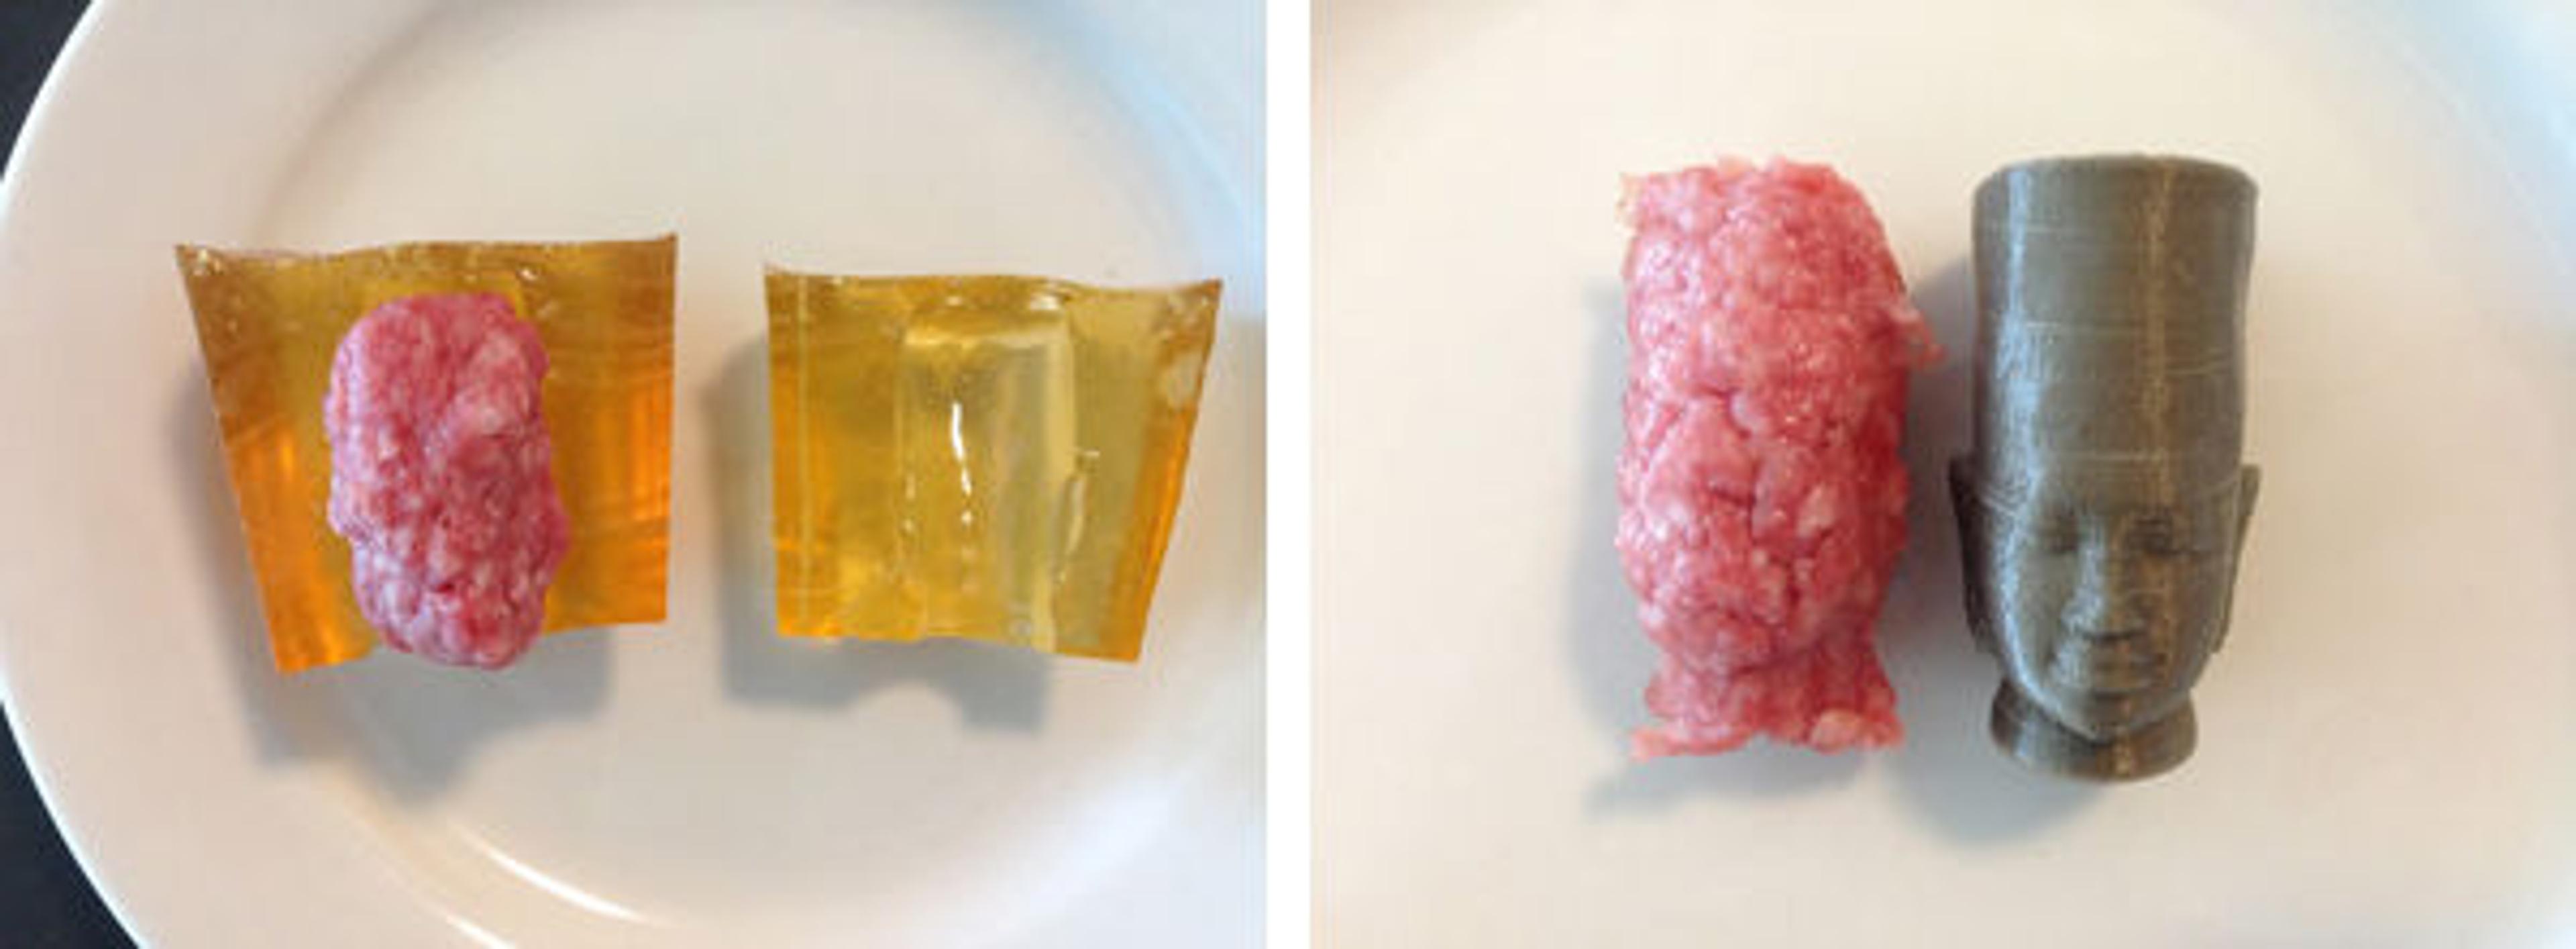 Left: Meat in mold. Right: Meat casting next to 3D object.